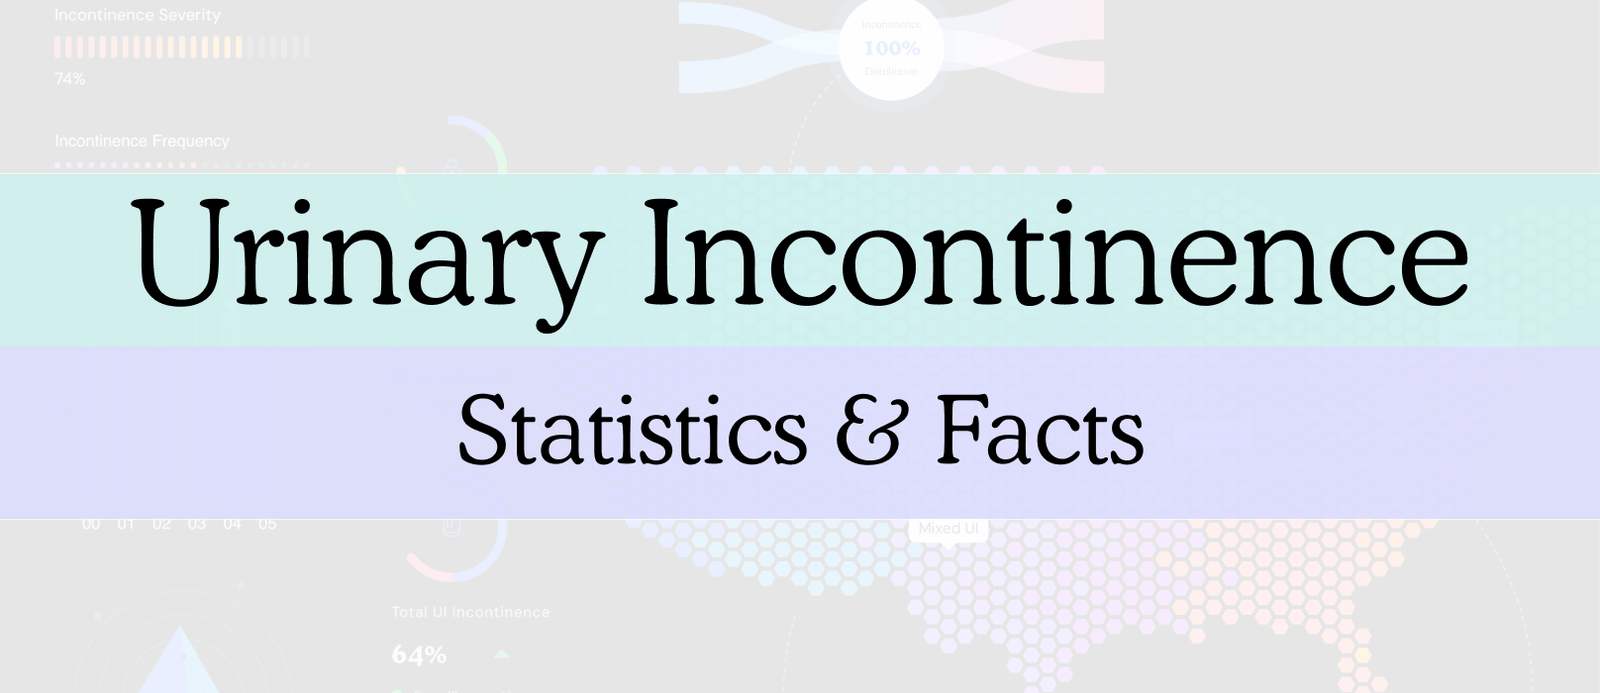 Urinary Incontinence: Statistics and Facts